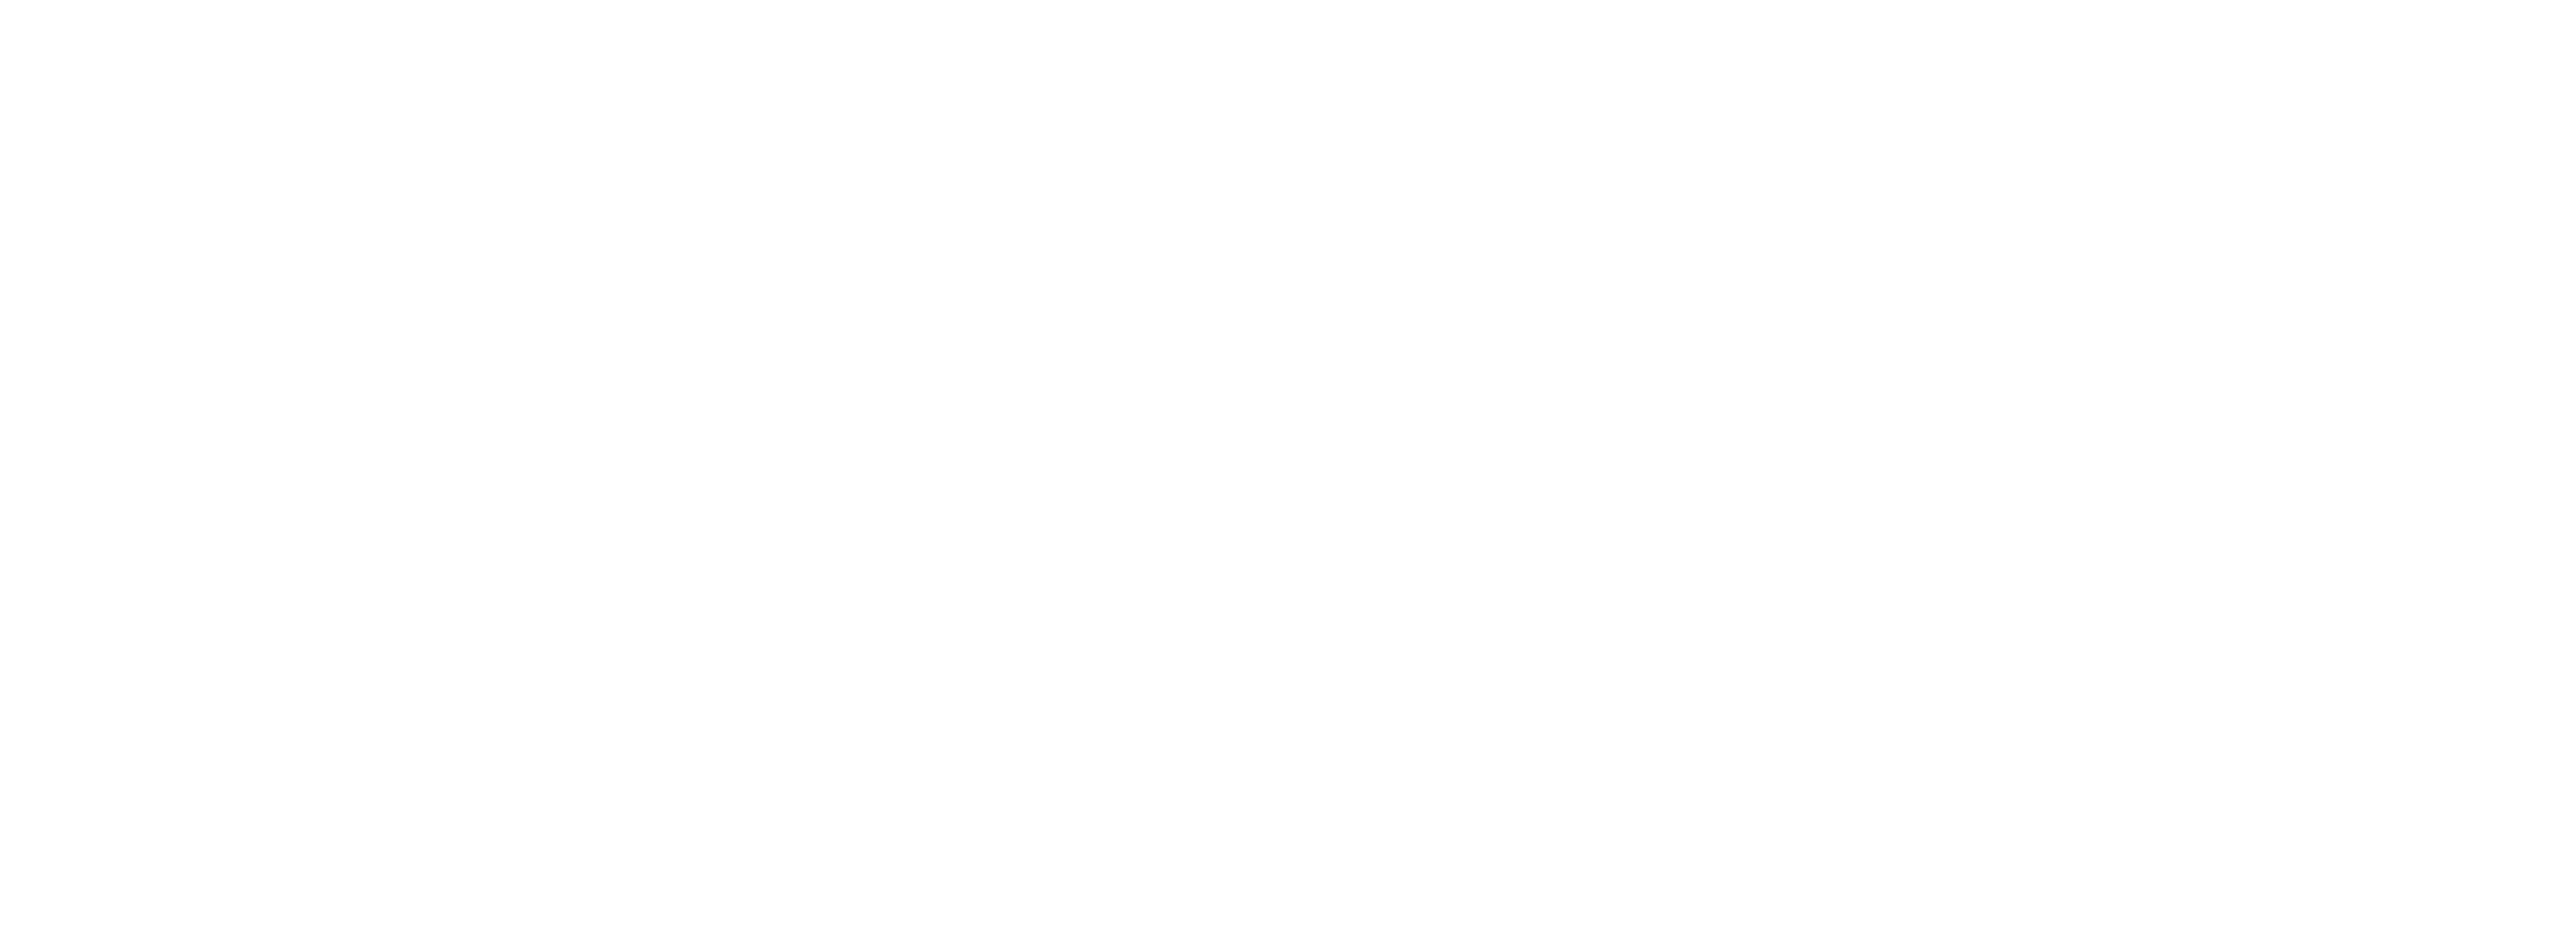 DIANAVE